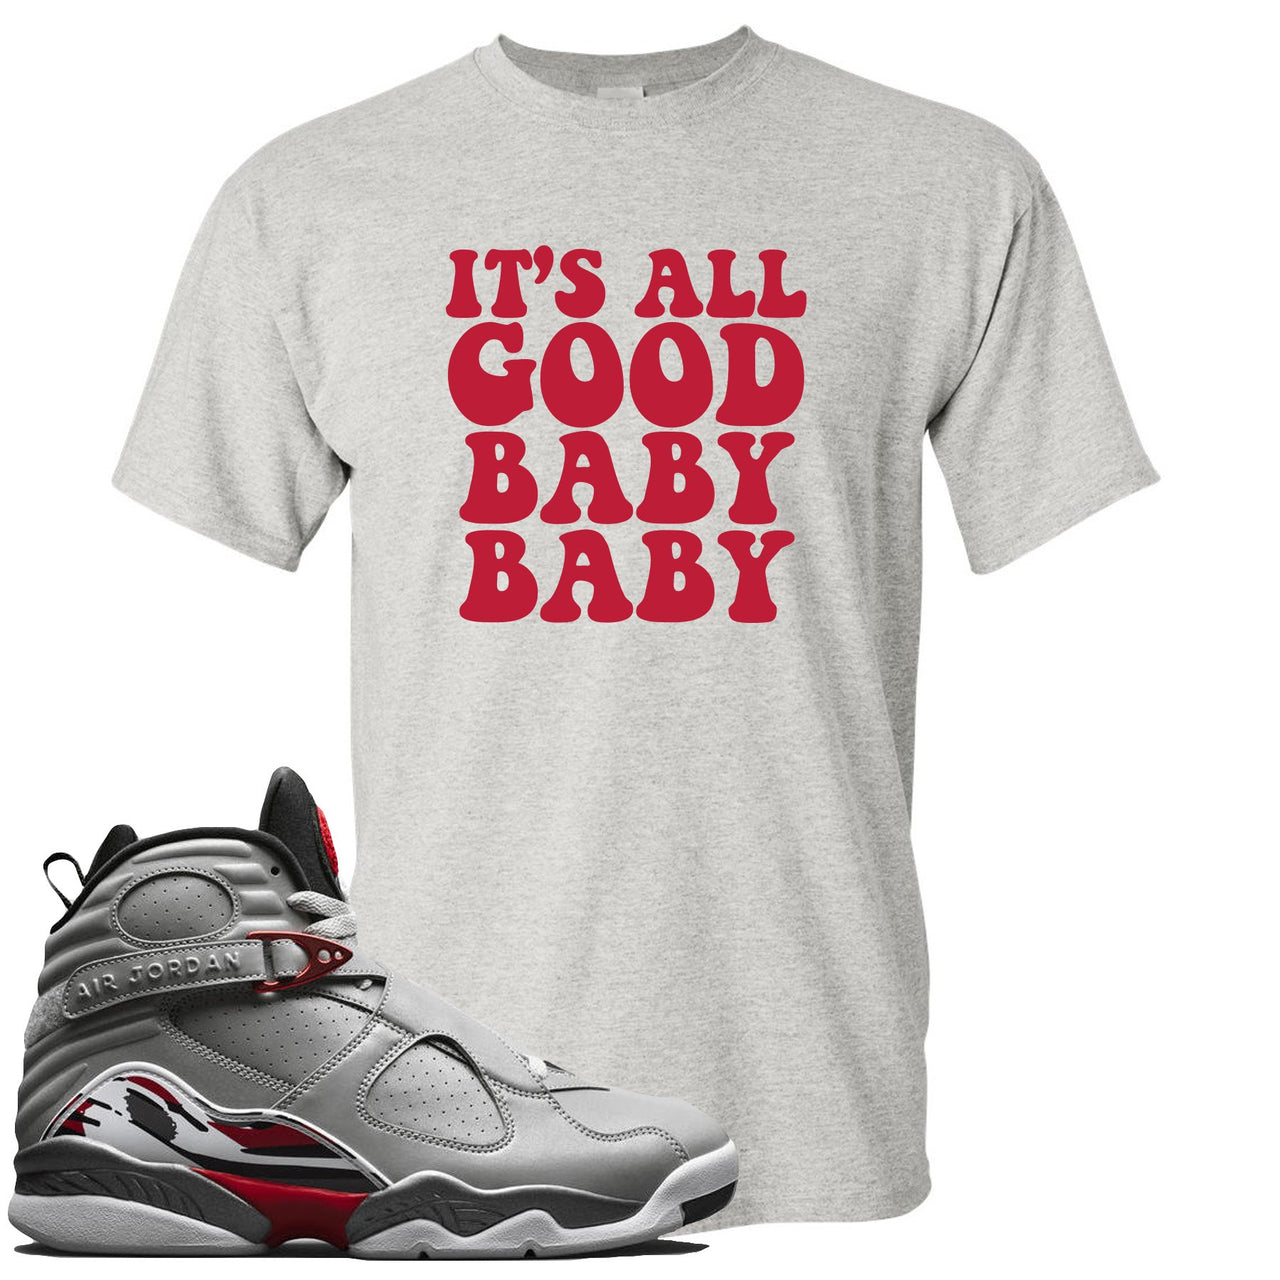 Reflections of a Champion 8s T Shirt | It's All Good Baby Baby, Sports Gray